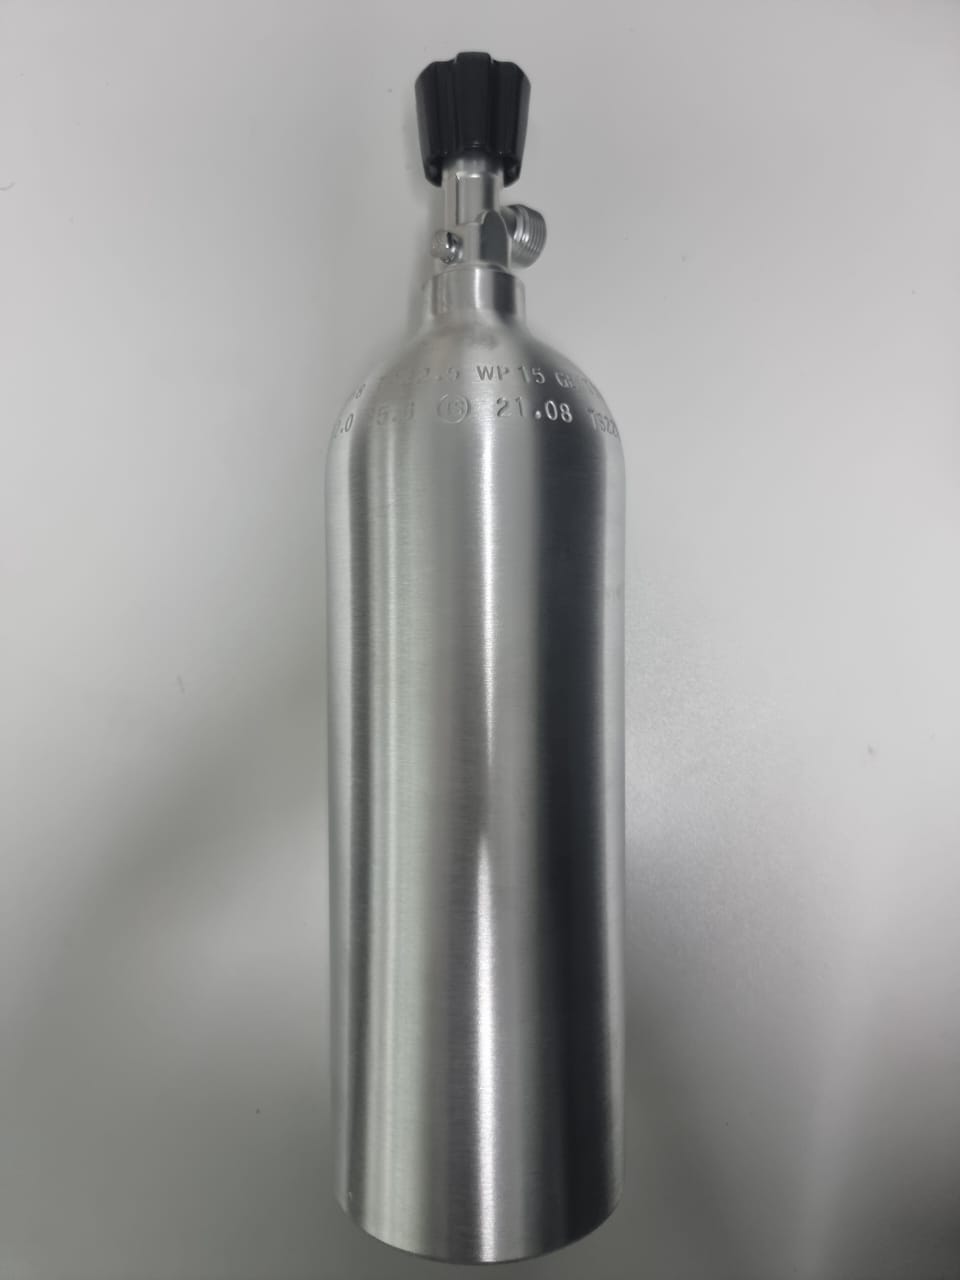 Aluminium CO2 cylinders with CO2 gas